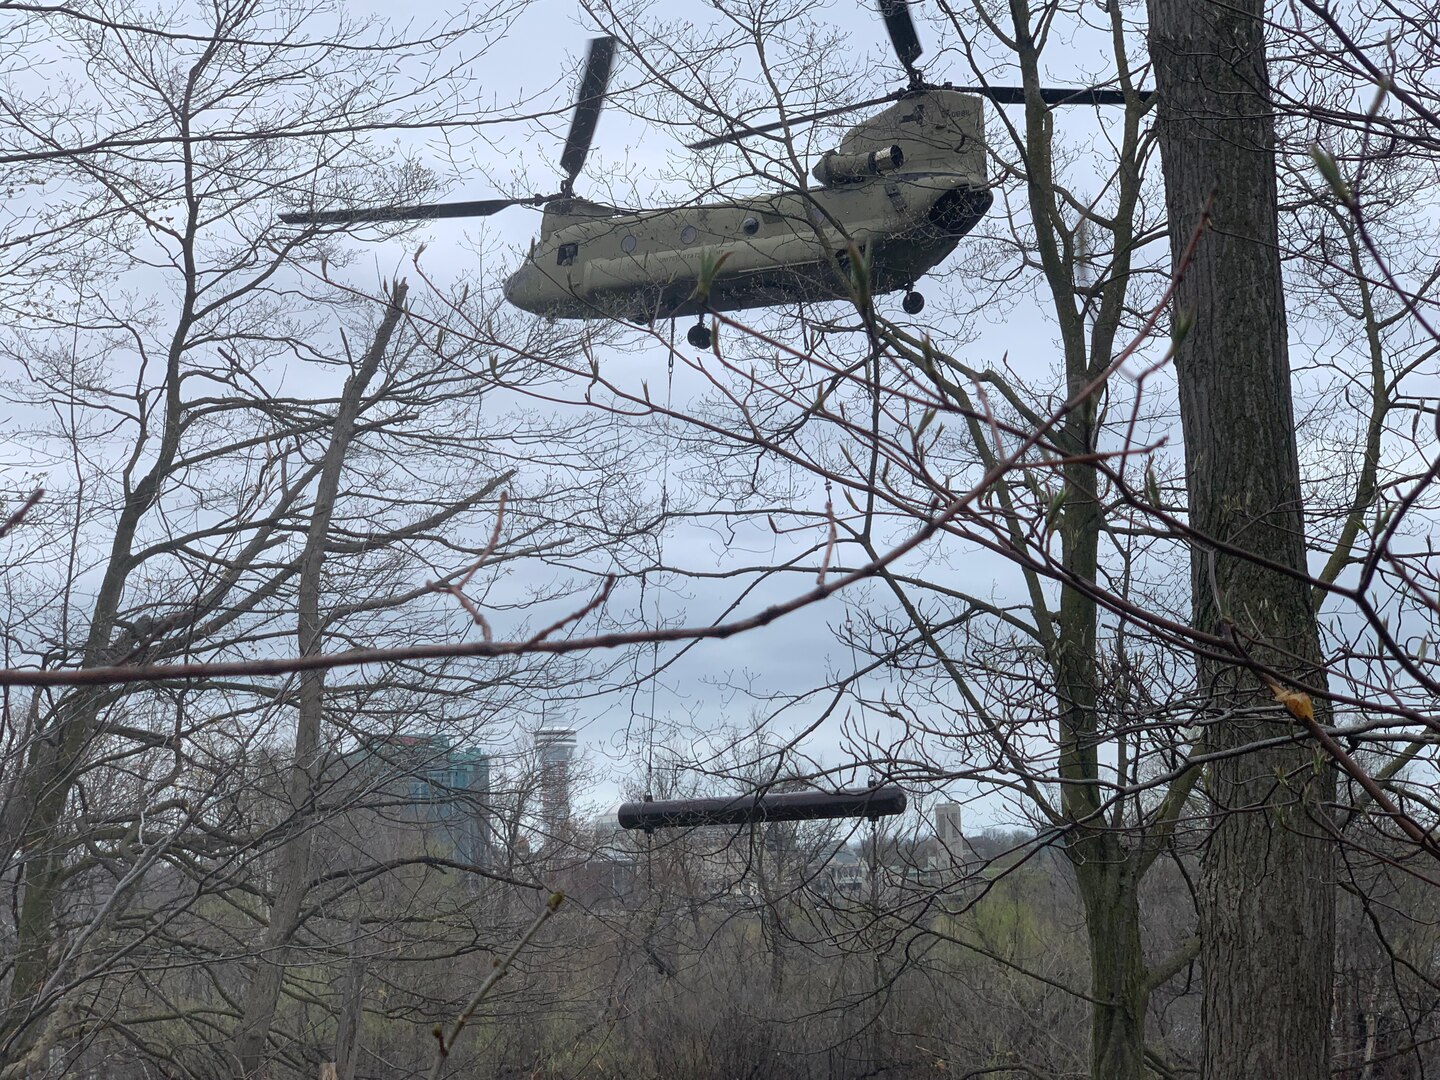 A CH-47 Chinook assigned to the New York Army National Guard’s Bravo Company, 3rd Battalion, 126th Aviation removes a 3,900-pound steel pontoon from the Niagara River just above the American side of Niagara Falls in Niagara Falls, New York on May 4, 2022. The pontoon, which washed away from an ice dam in 2019, was removed because of concerns that it could go over the falls and damage the “Cave of the Winds”.